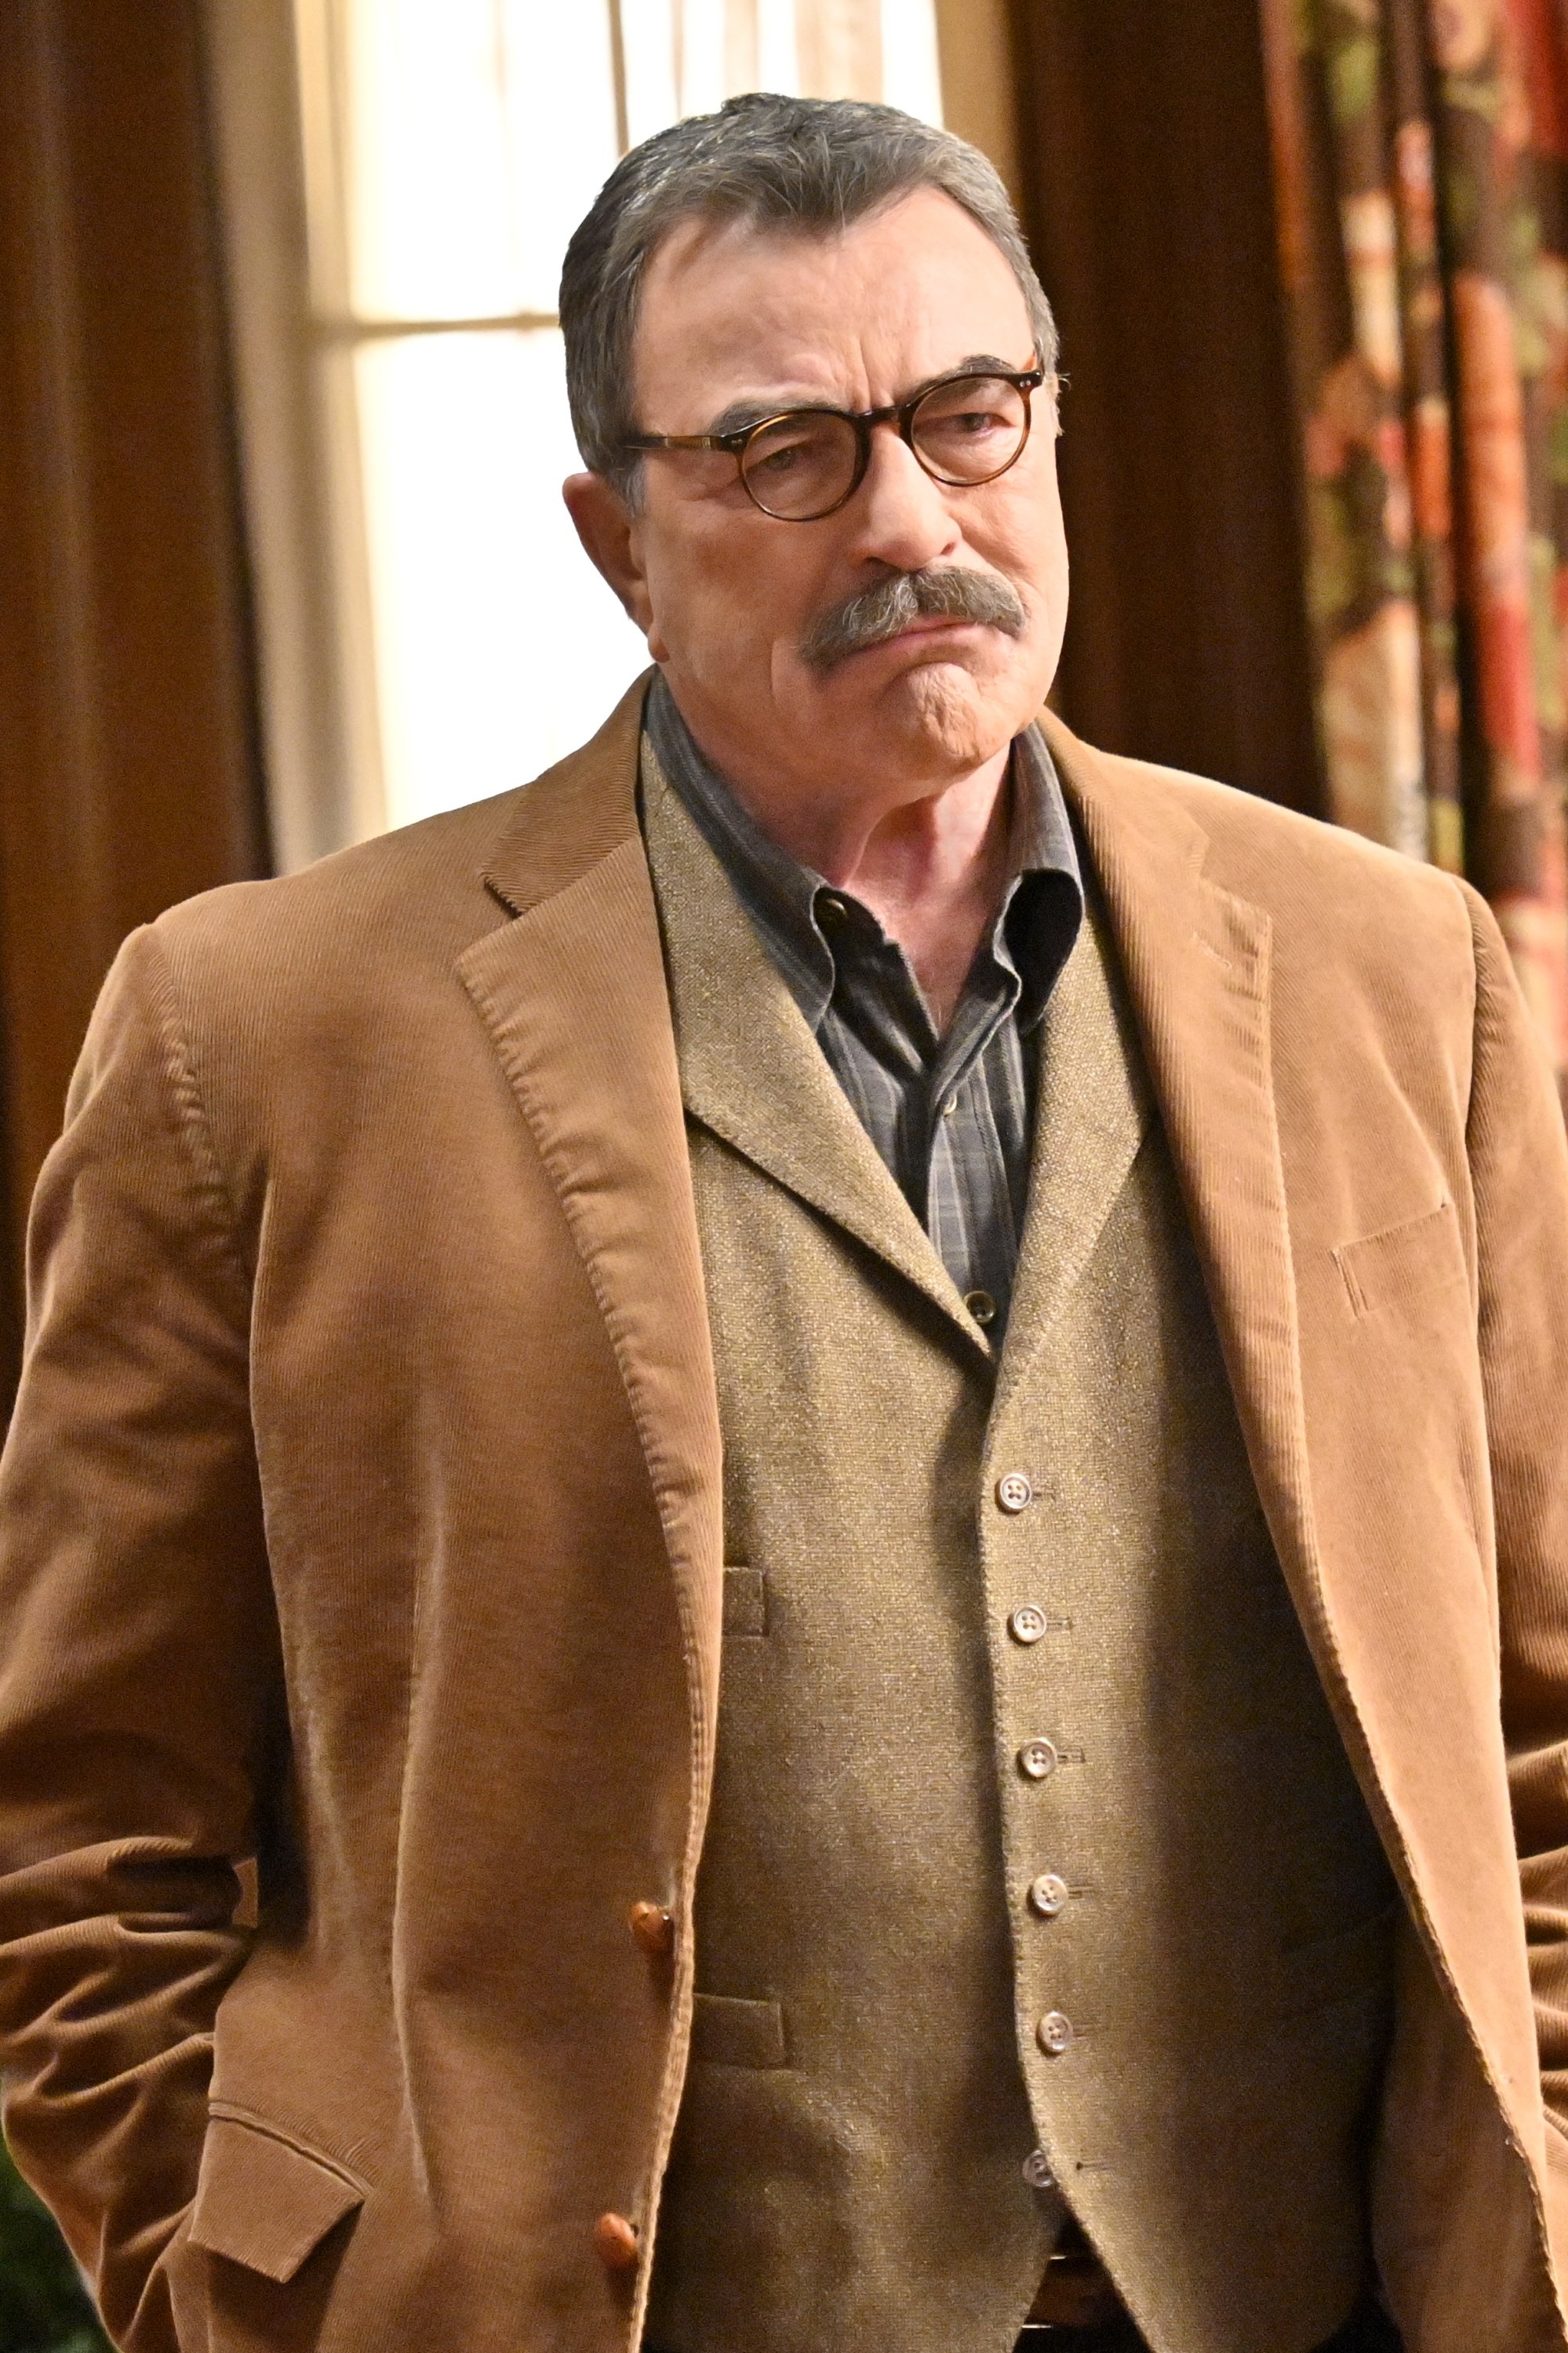 Tom Selleck on an episode of "Blue Bloods" on May 1, 2020. | Source: Getty Images